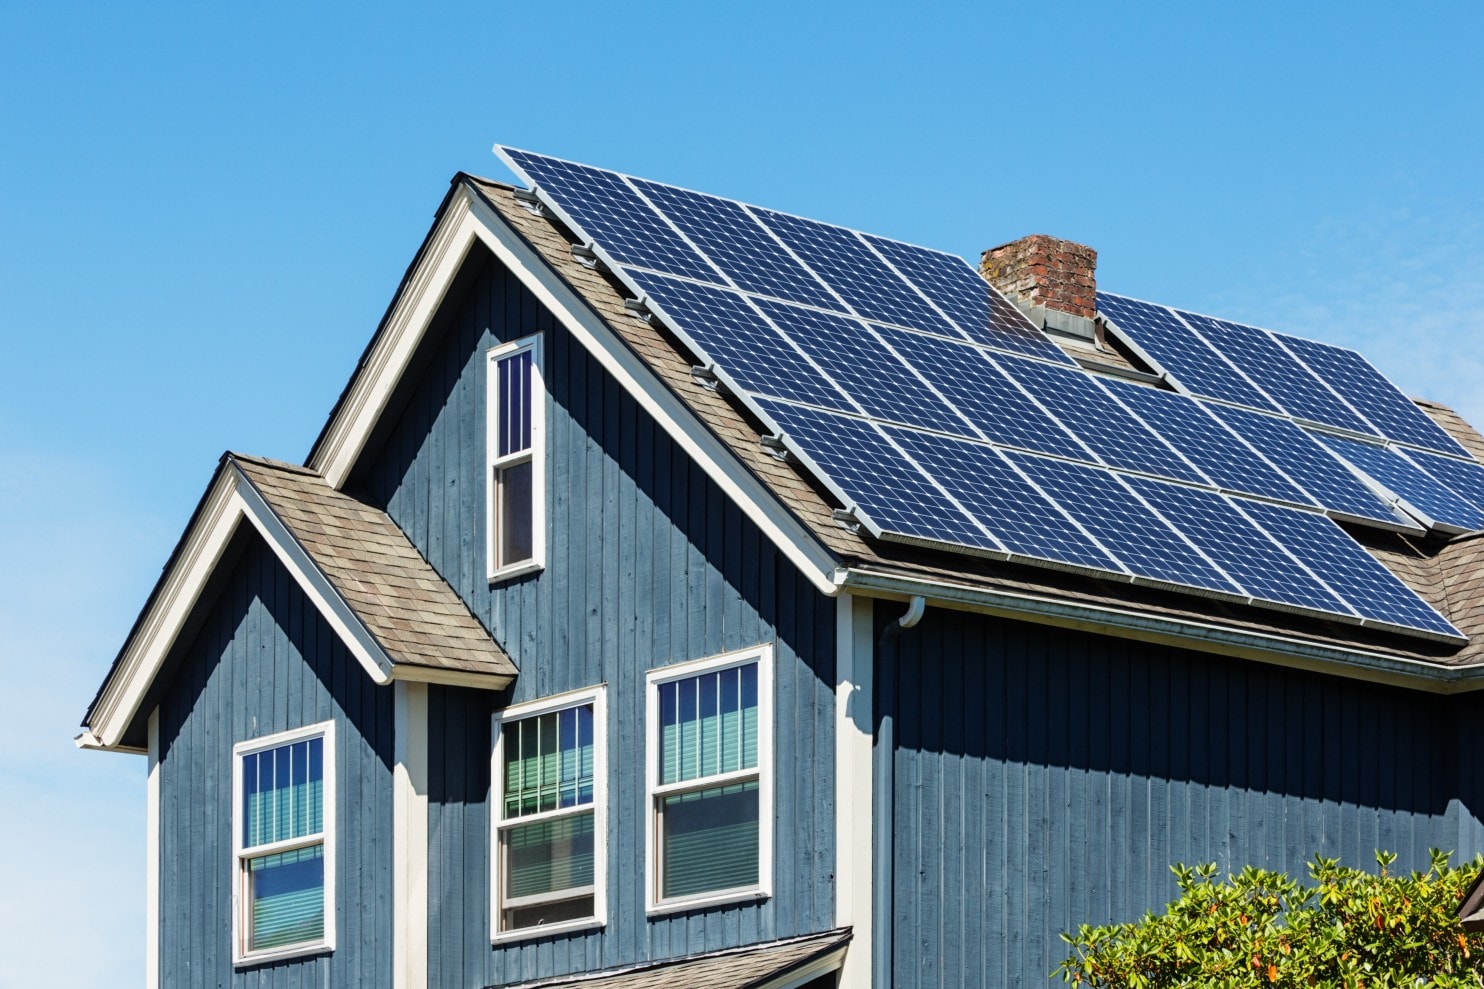 Considering getting solar panels? Here are the right ...